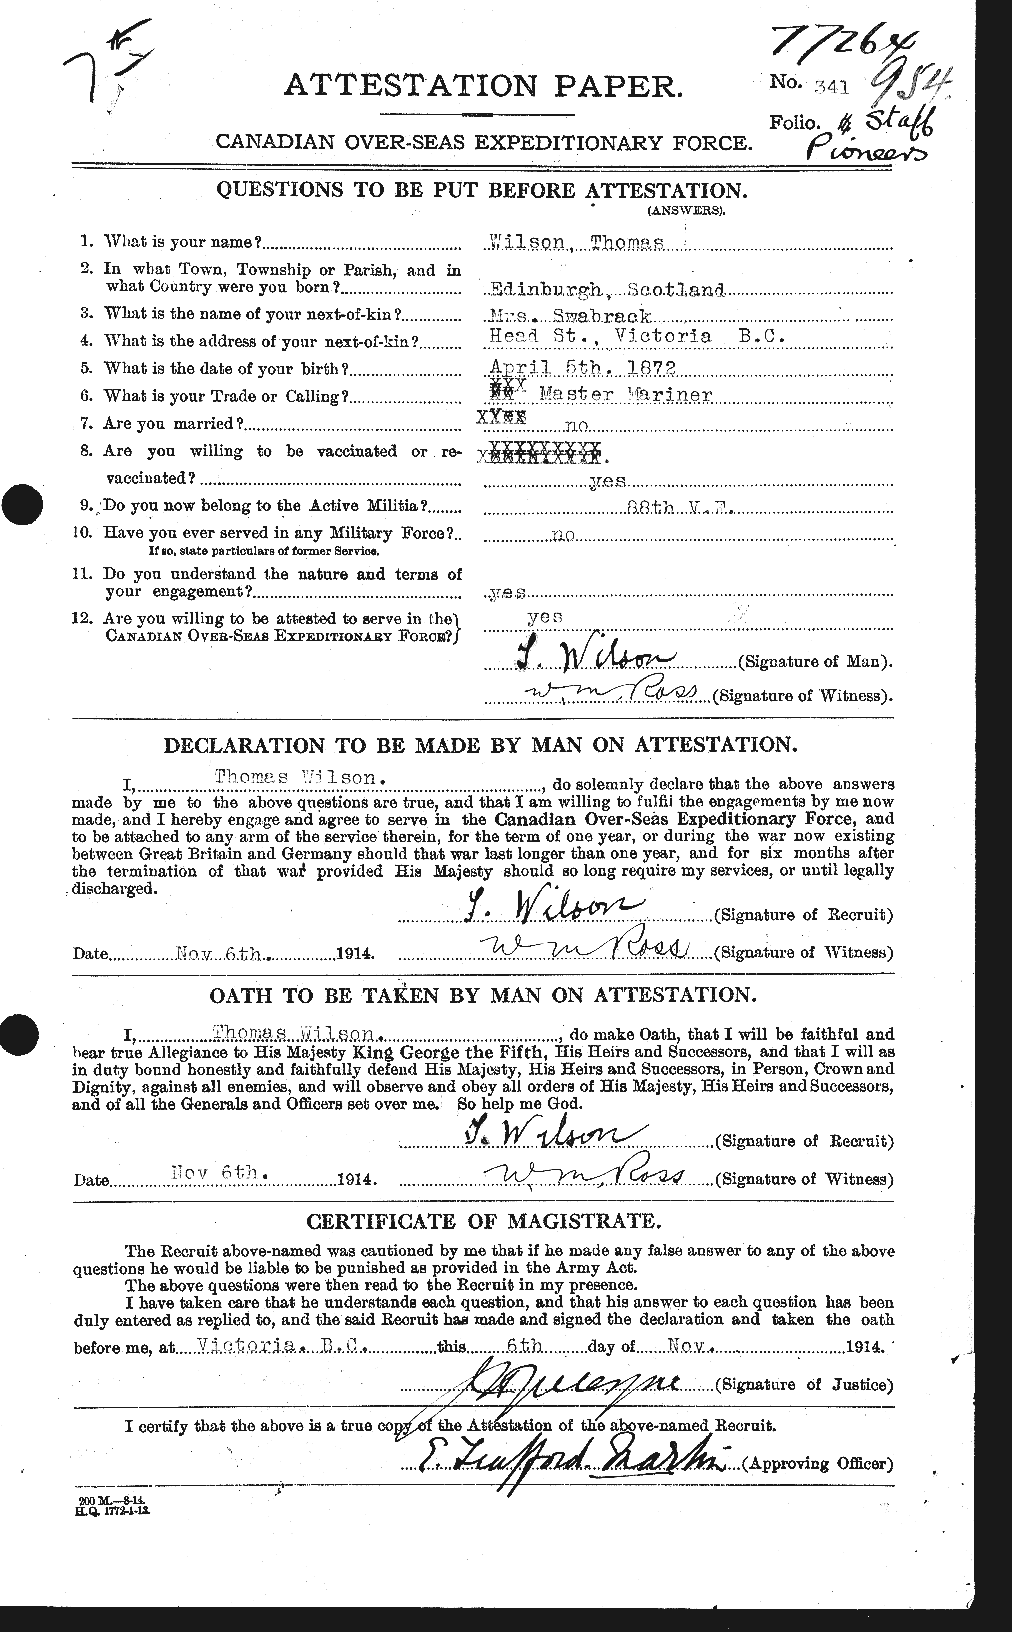 Personnel Records of the First World War - CEF 681194a